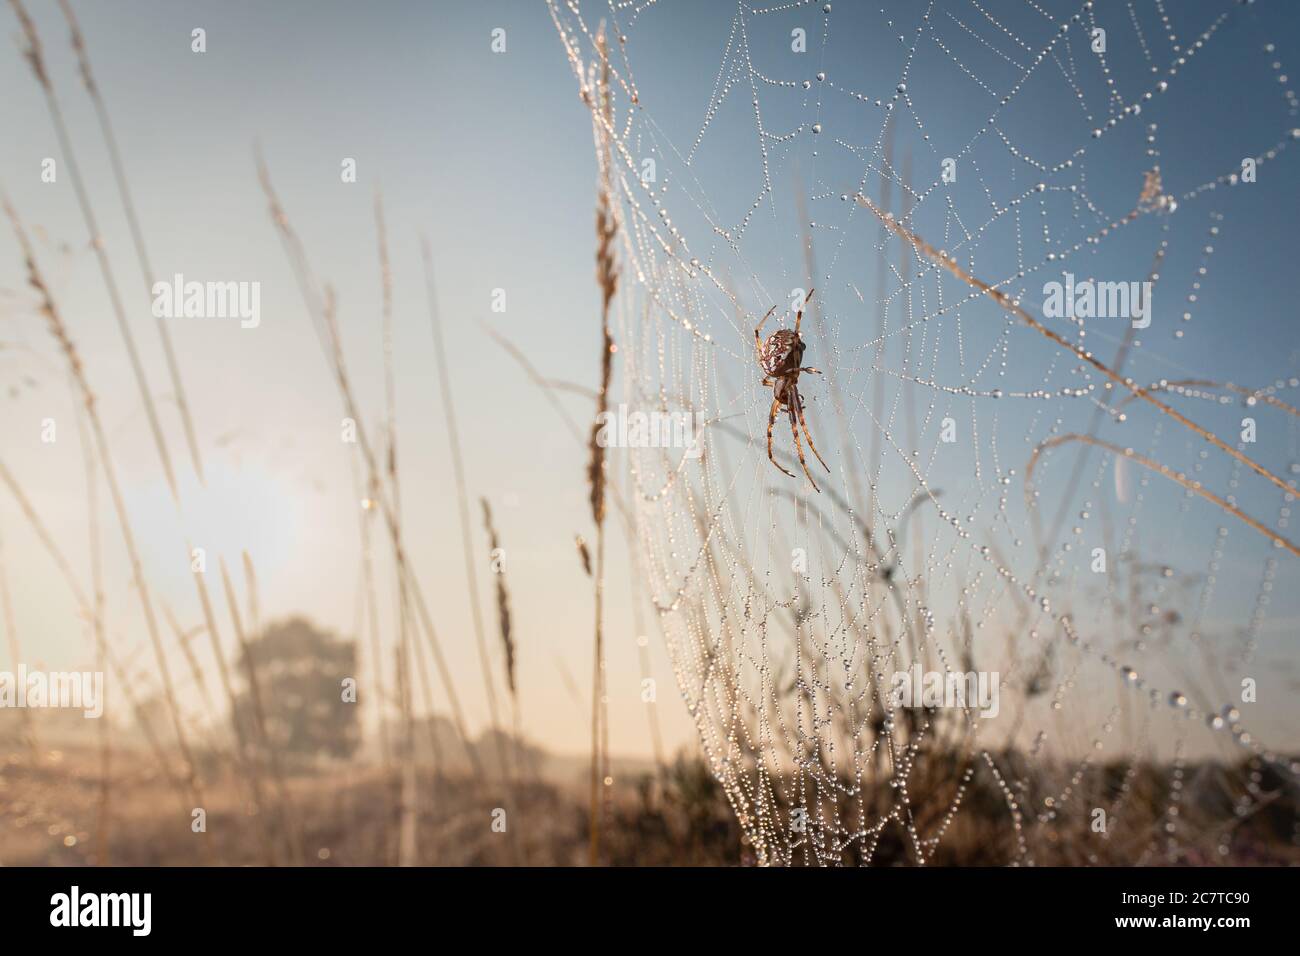 The Neoscona adianta spider waits on its dew covered web as the sun rises behind it on Cavenham heath in Suffolk Stock Photo